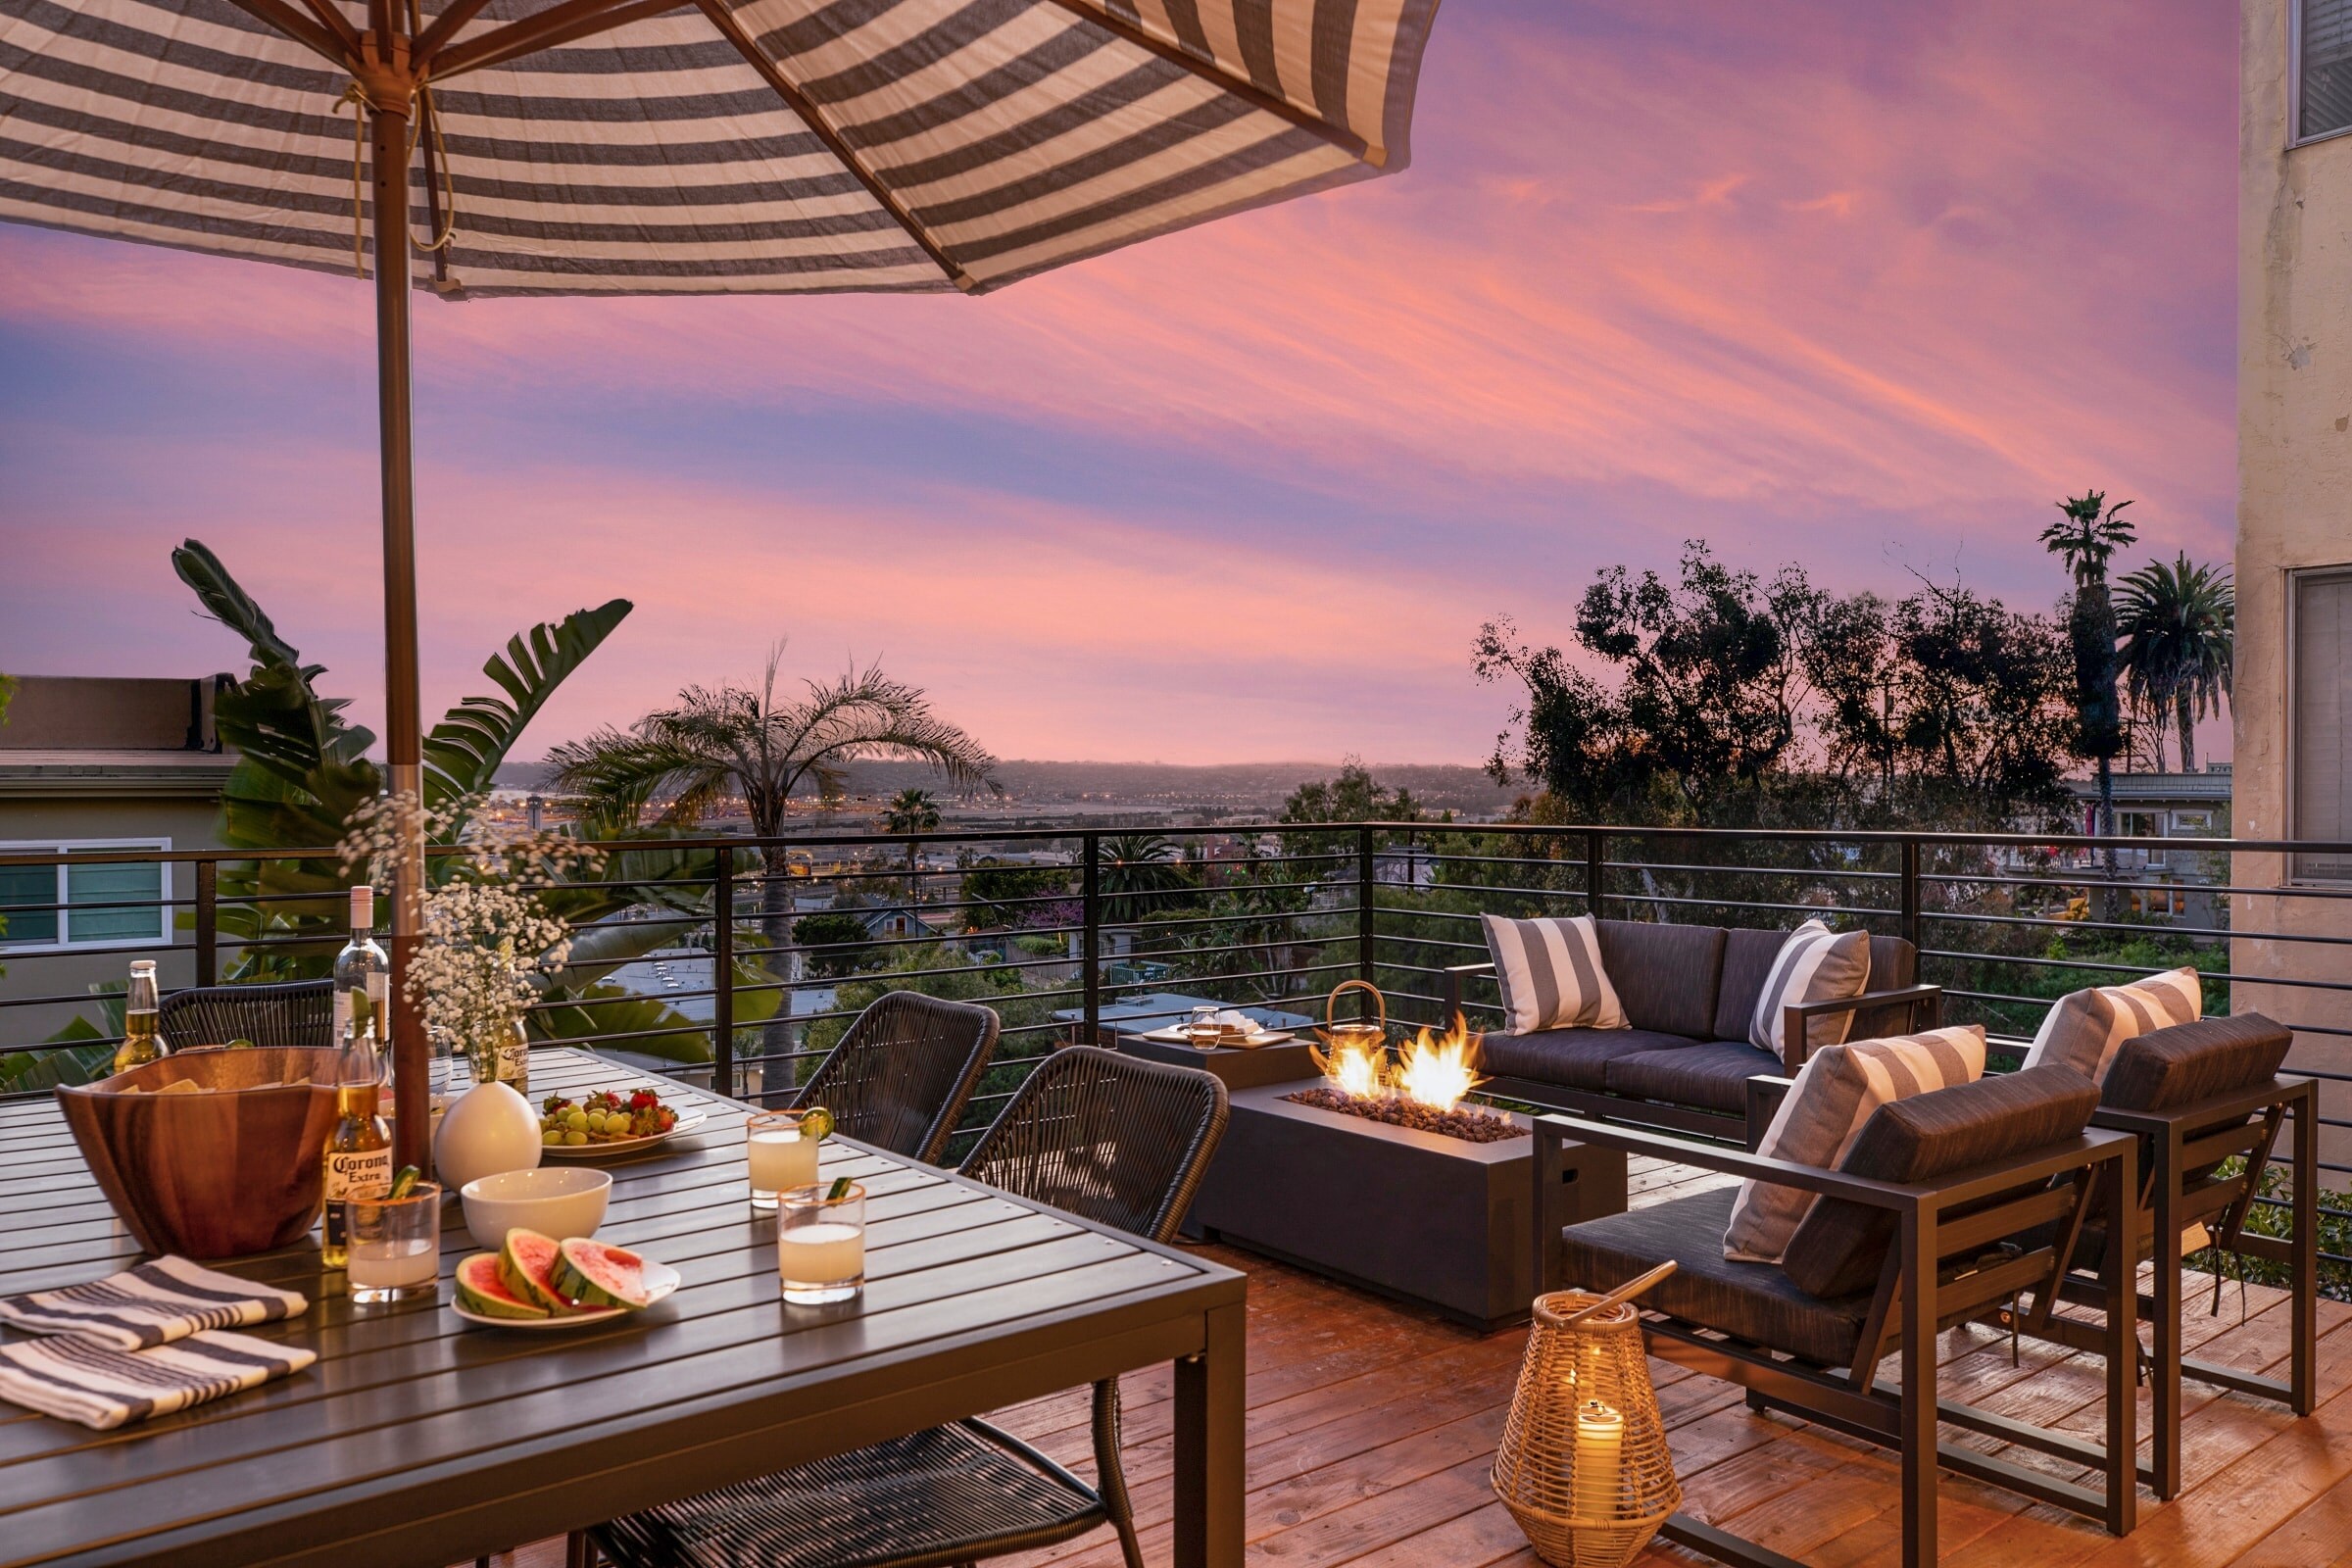 Enjoy sunsets and endless view from the patio.